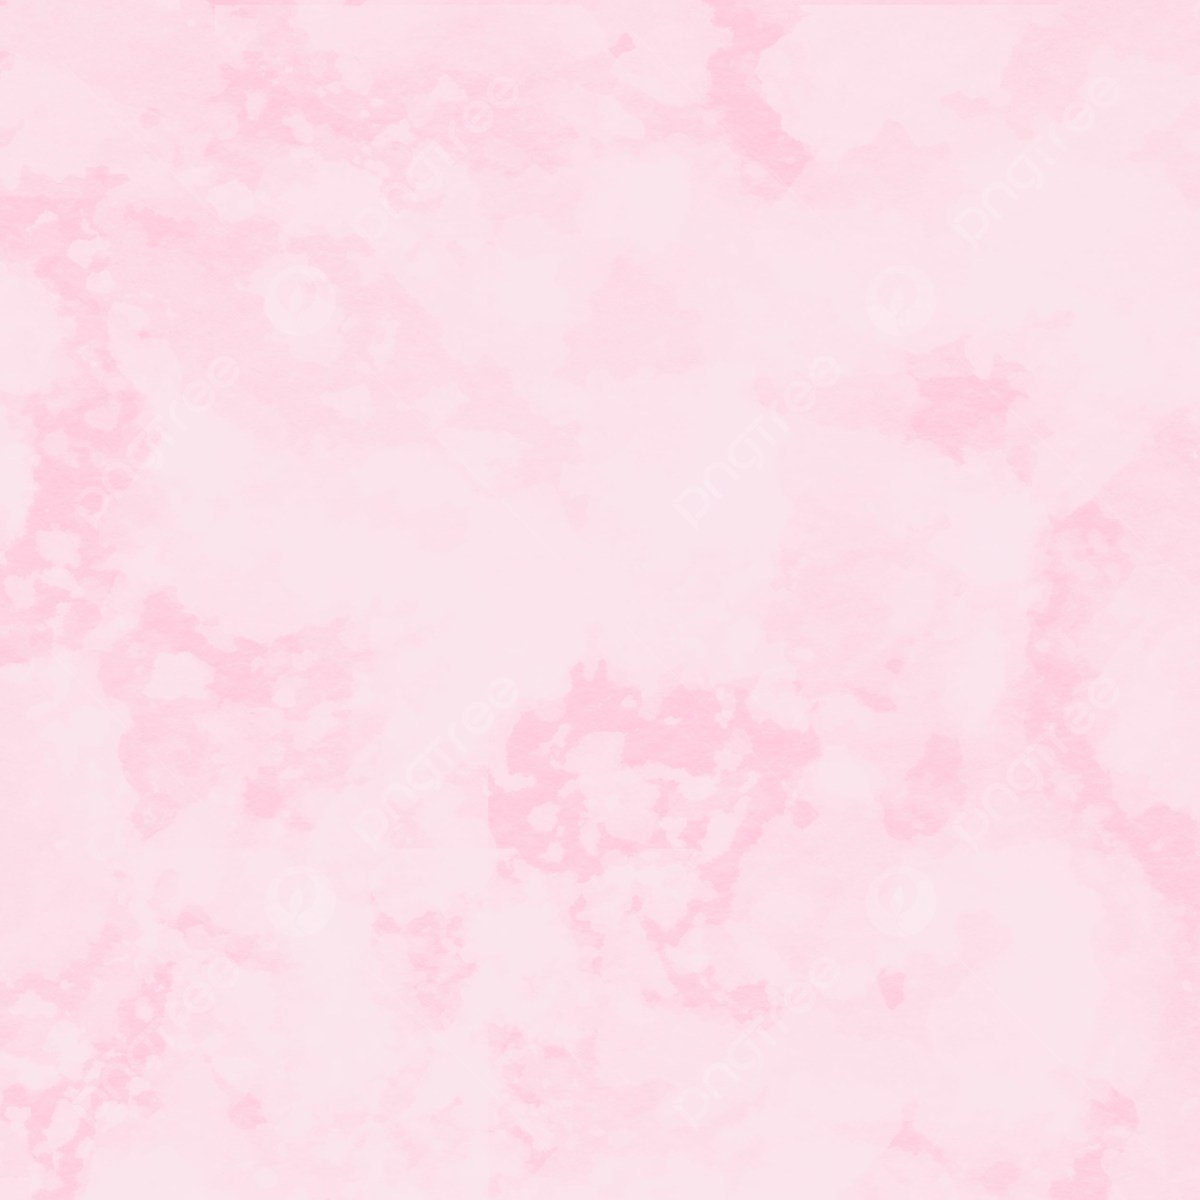 A pink watercolor background - Pastel pink